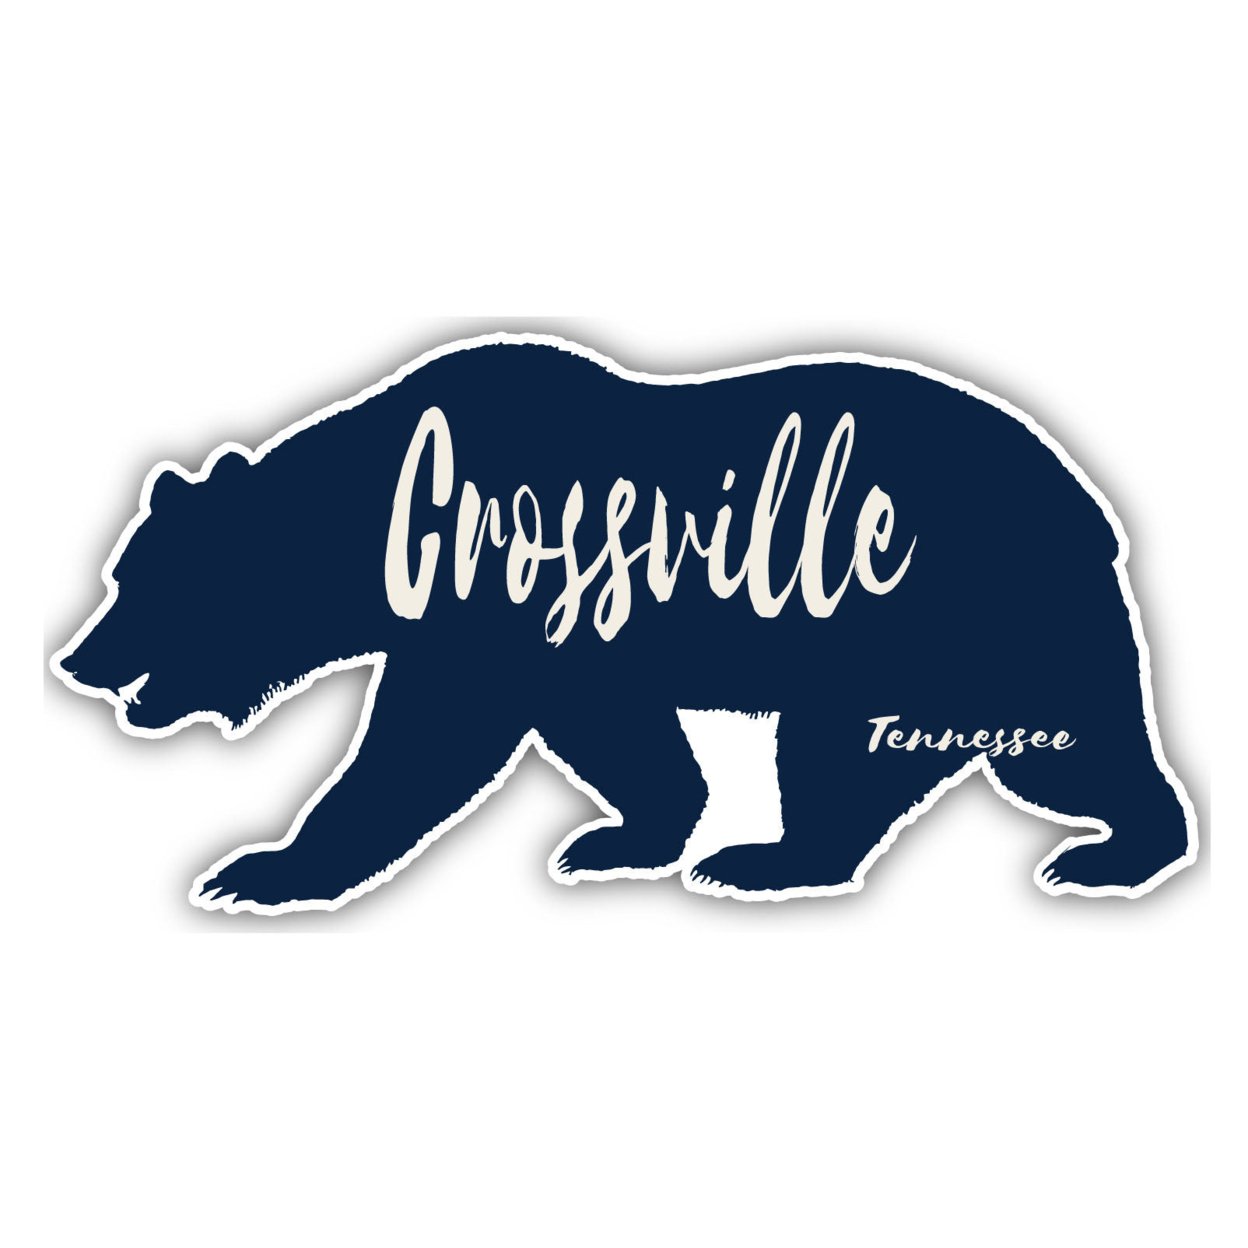 Crossville Tennessee Souvenir Decorative Stickers (Choose Theme And Size) - Single Unit, 12-Inch, Bear